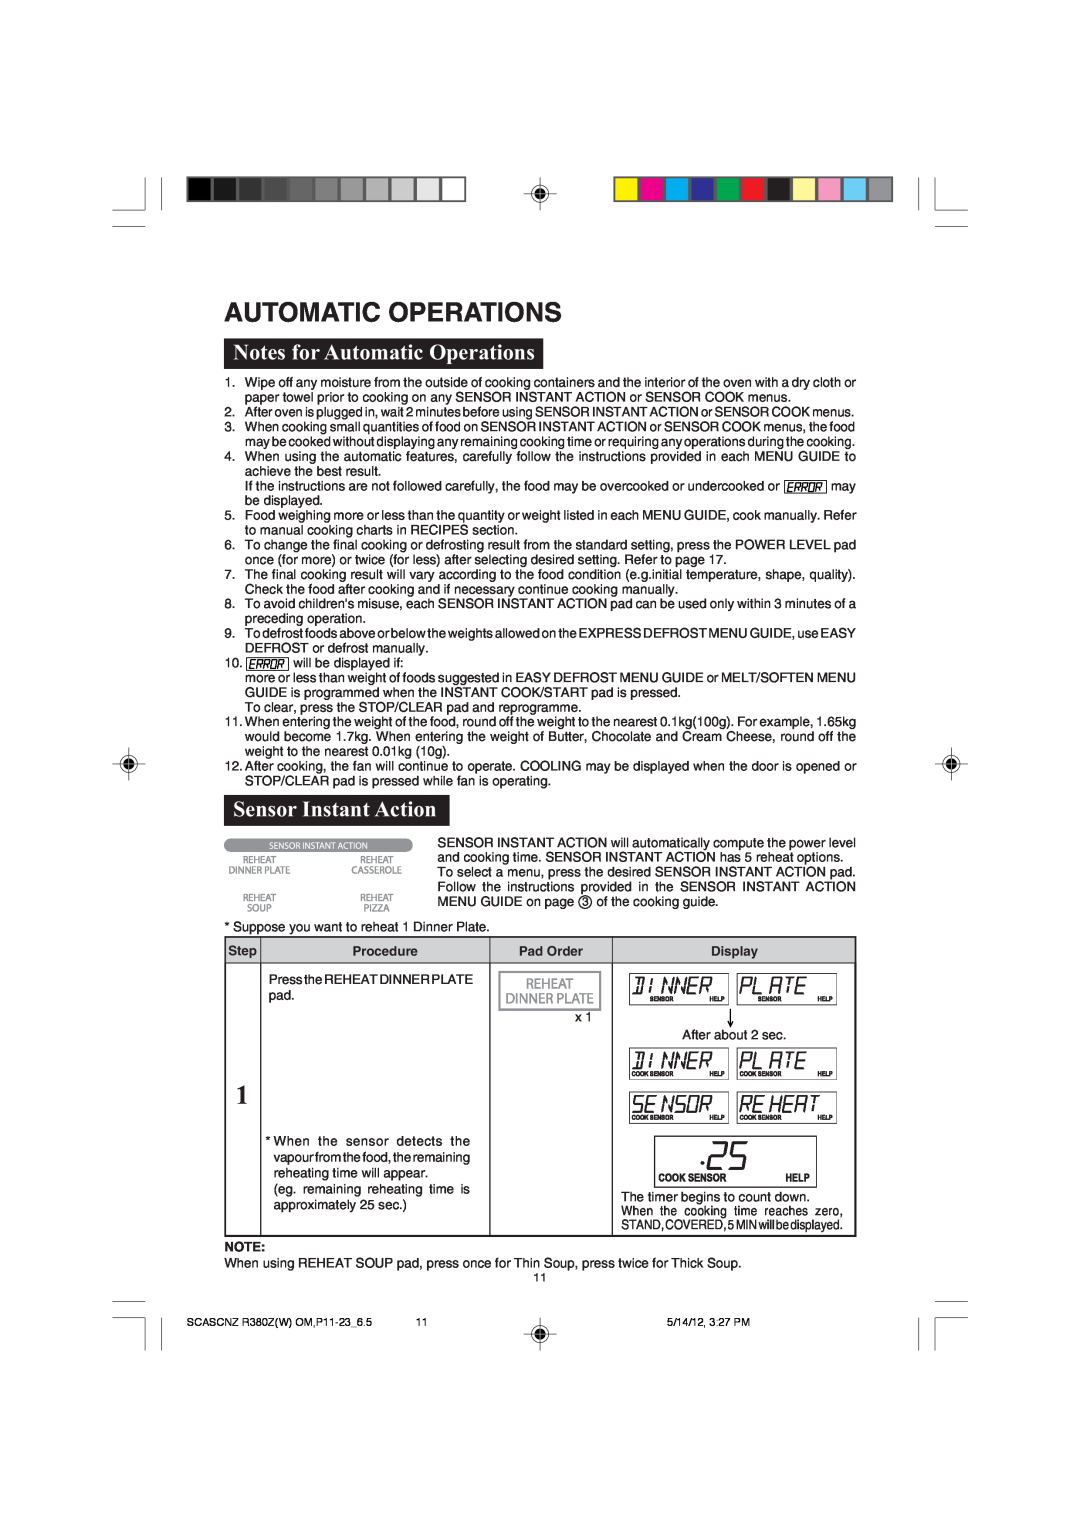 Sharp R-380Z(W) operation manual Notes for Automatic Operations, Sensor Instant Action 